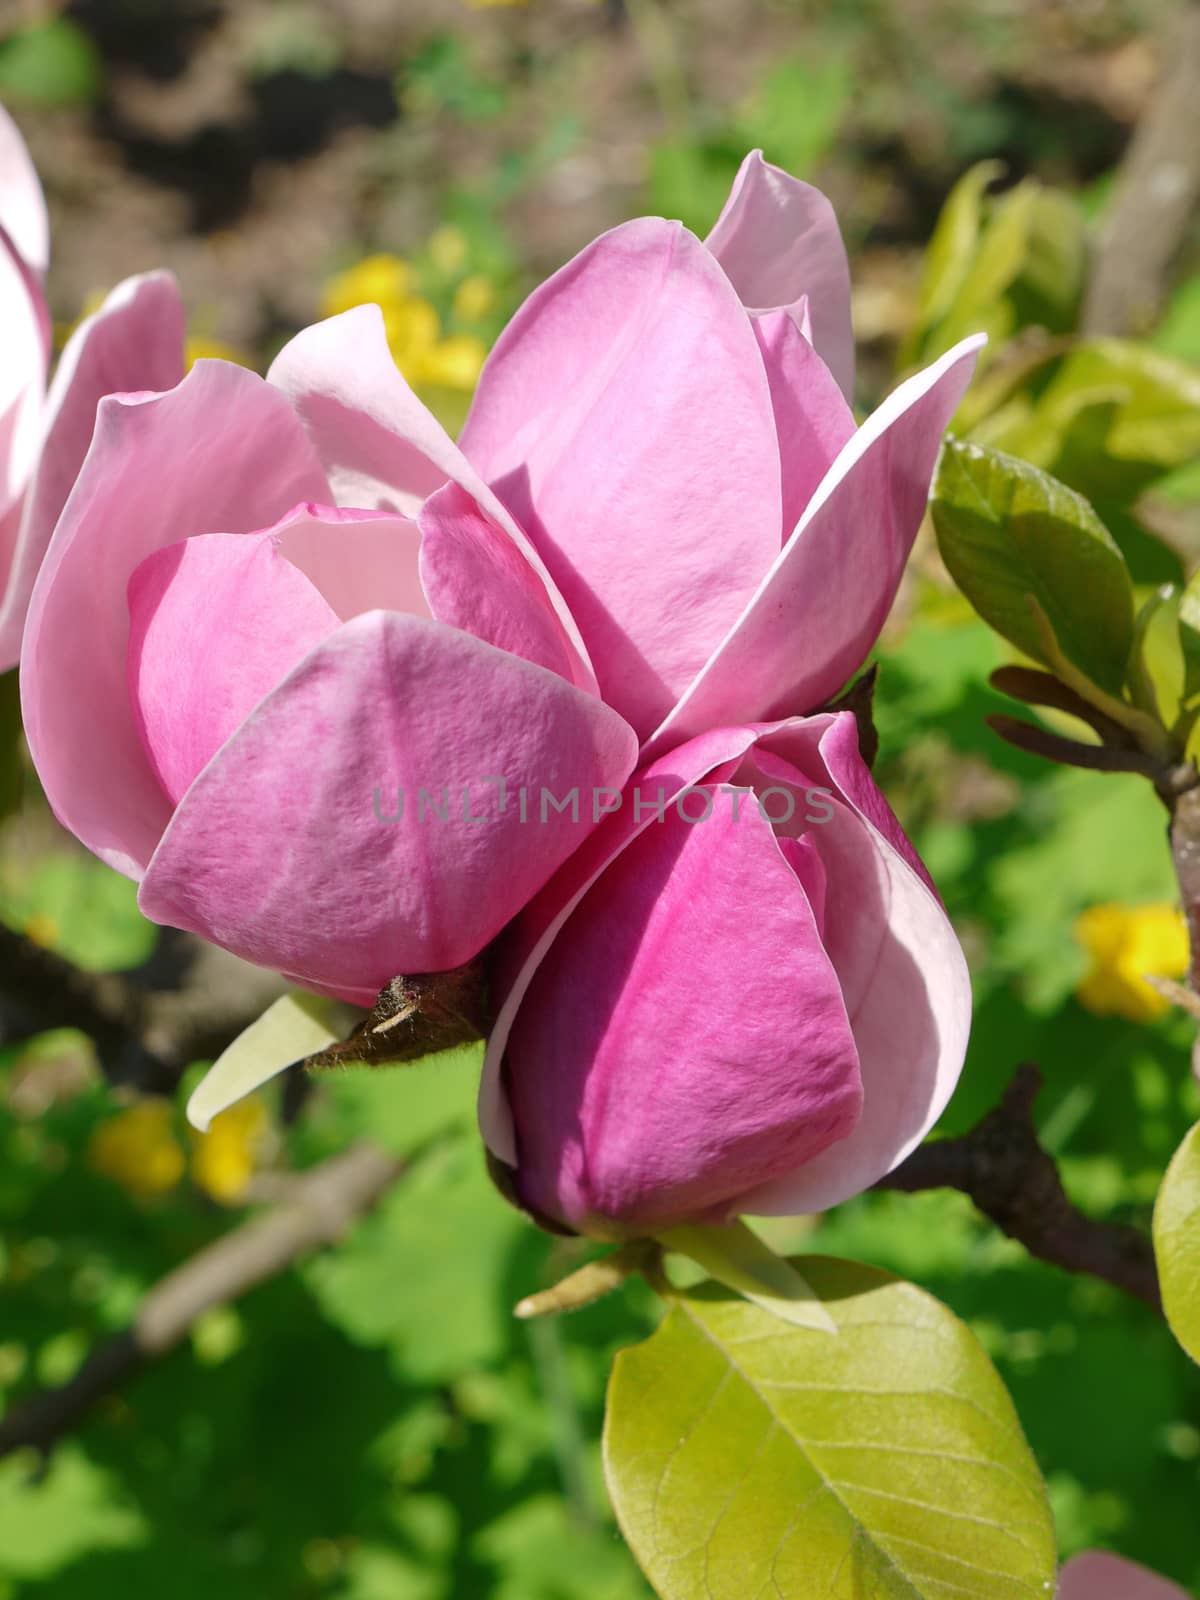 tender buds of budding rose petals on a bright sunny day